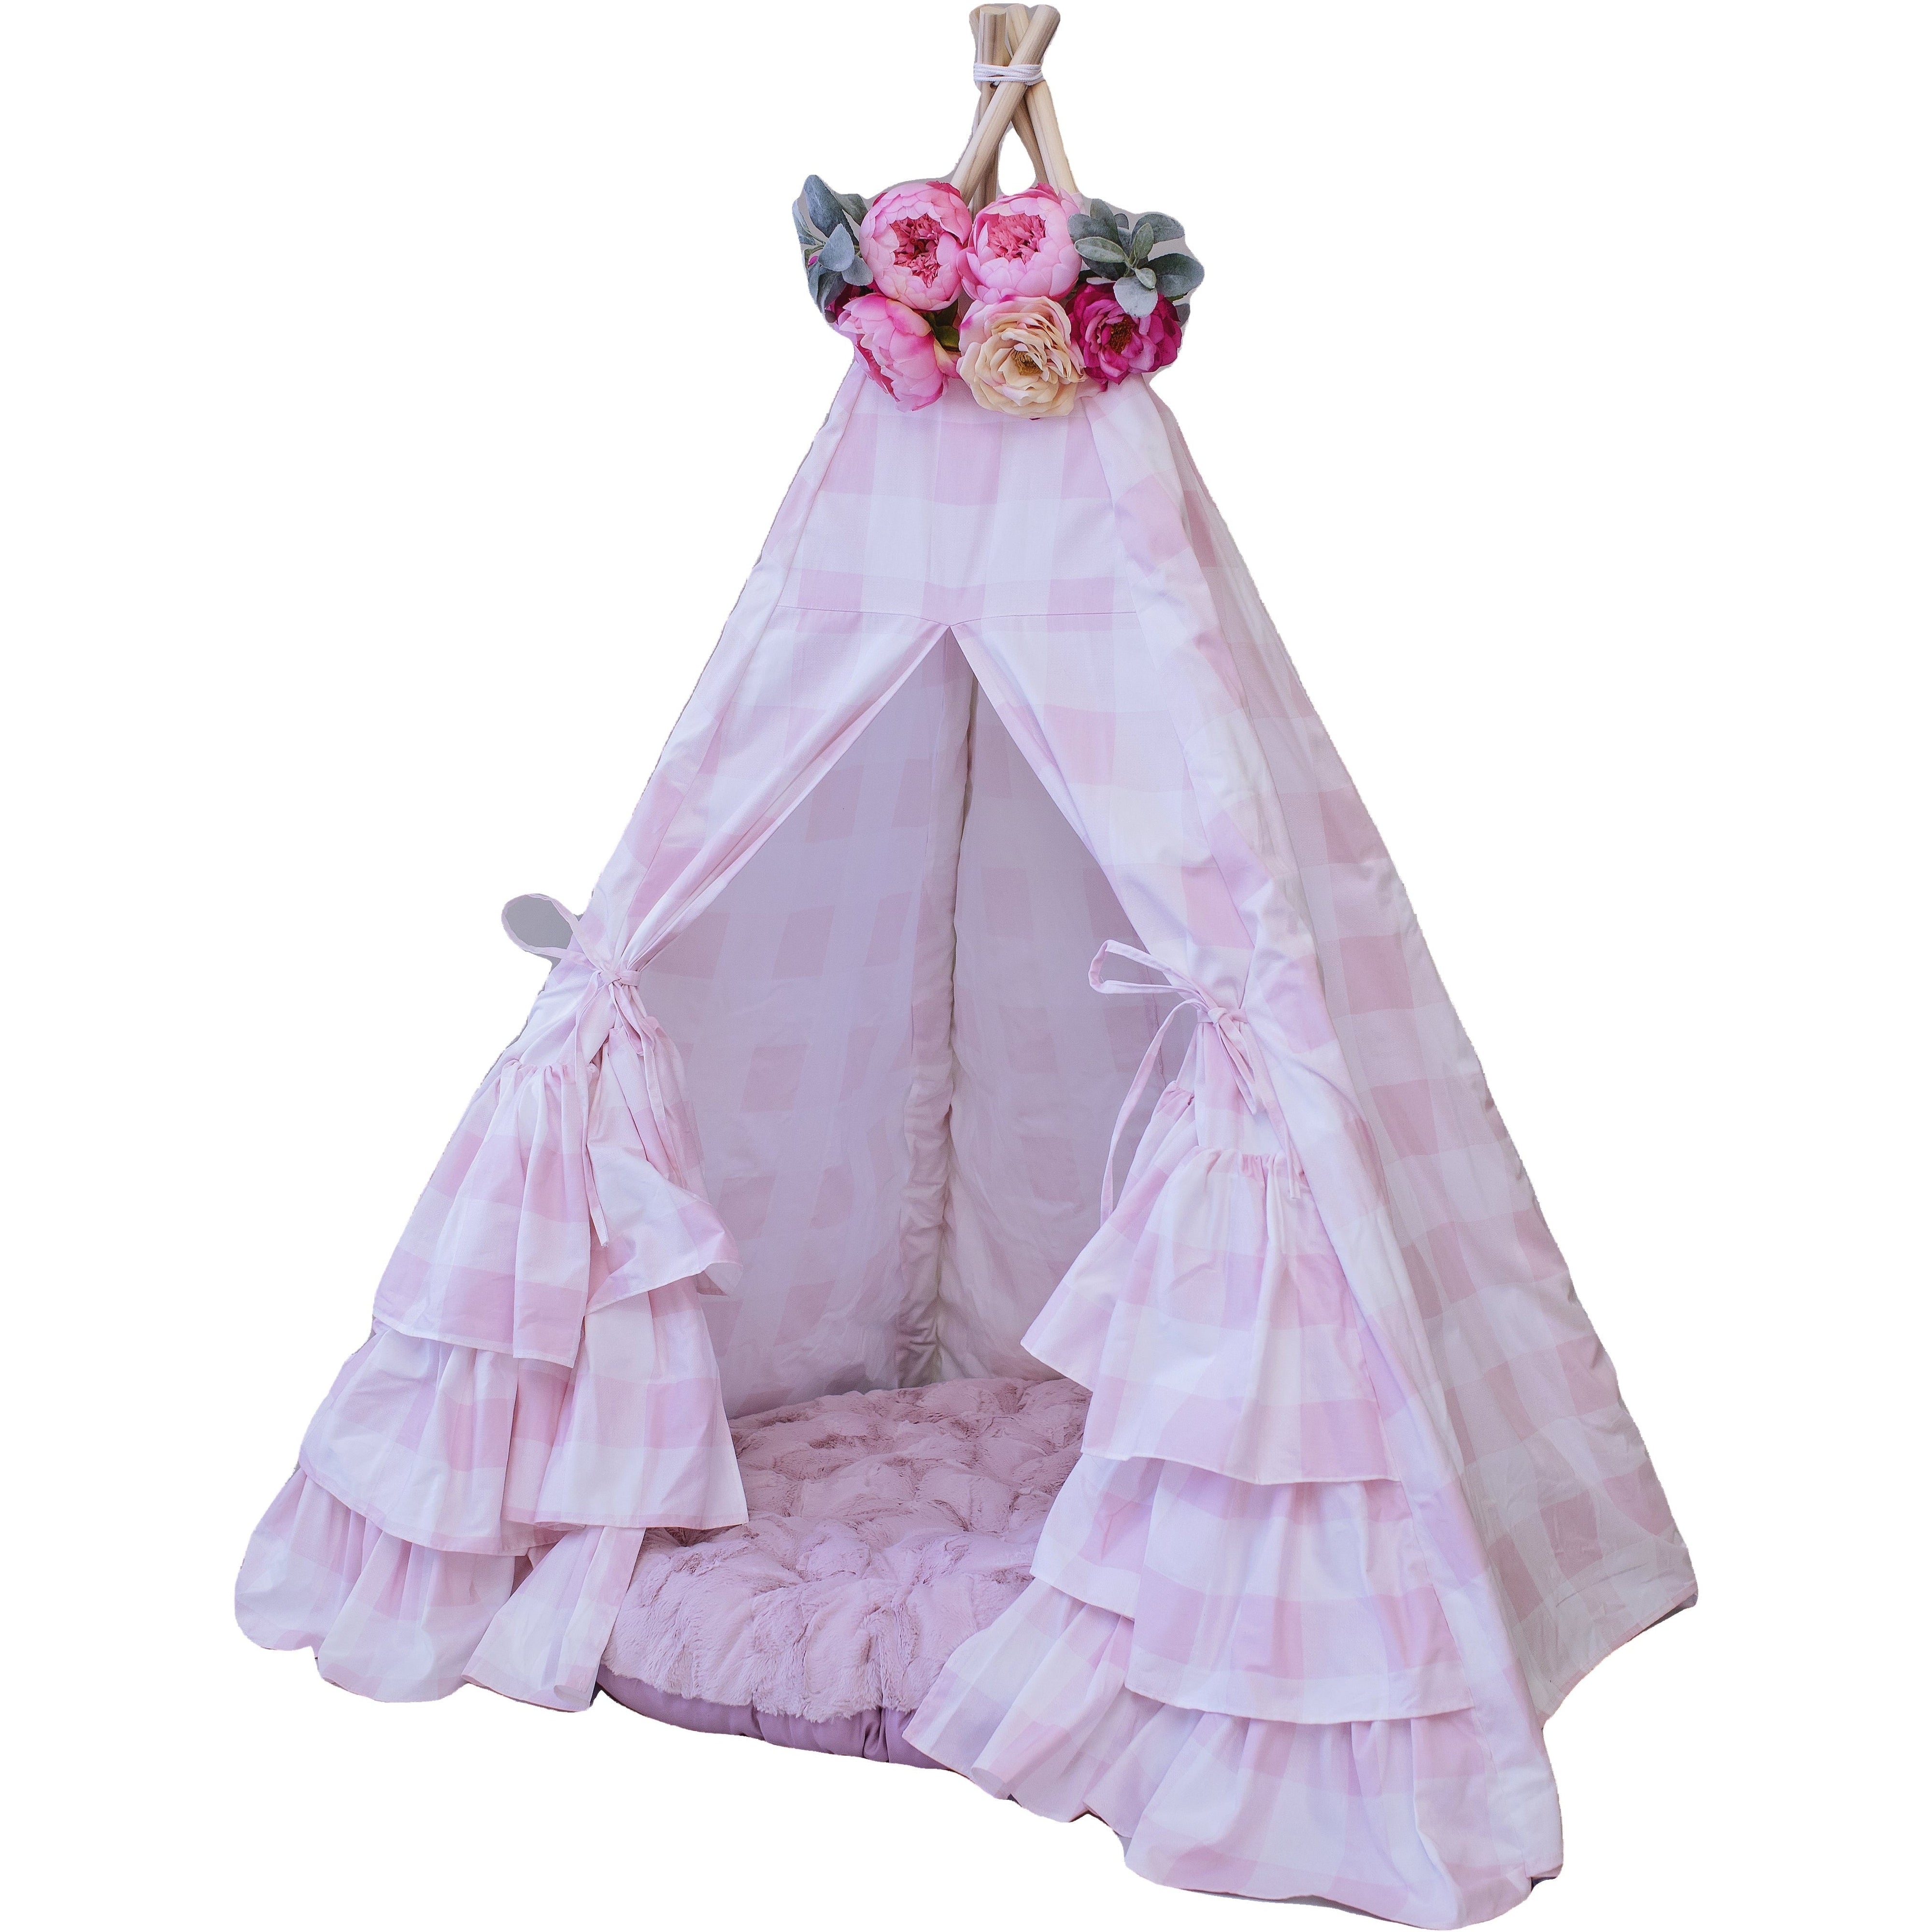 The Cecile Ruffle Play Tent